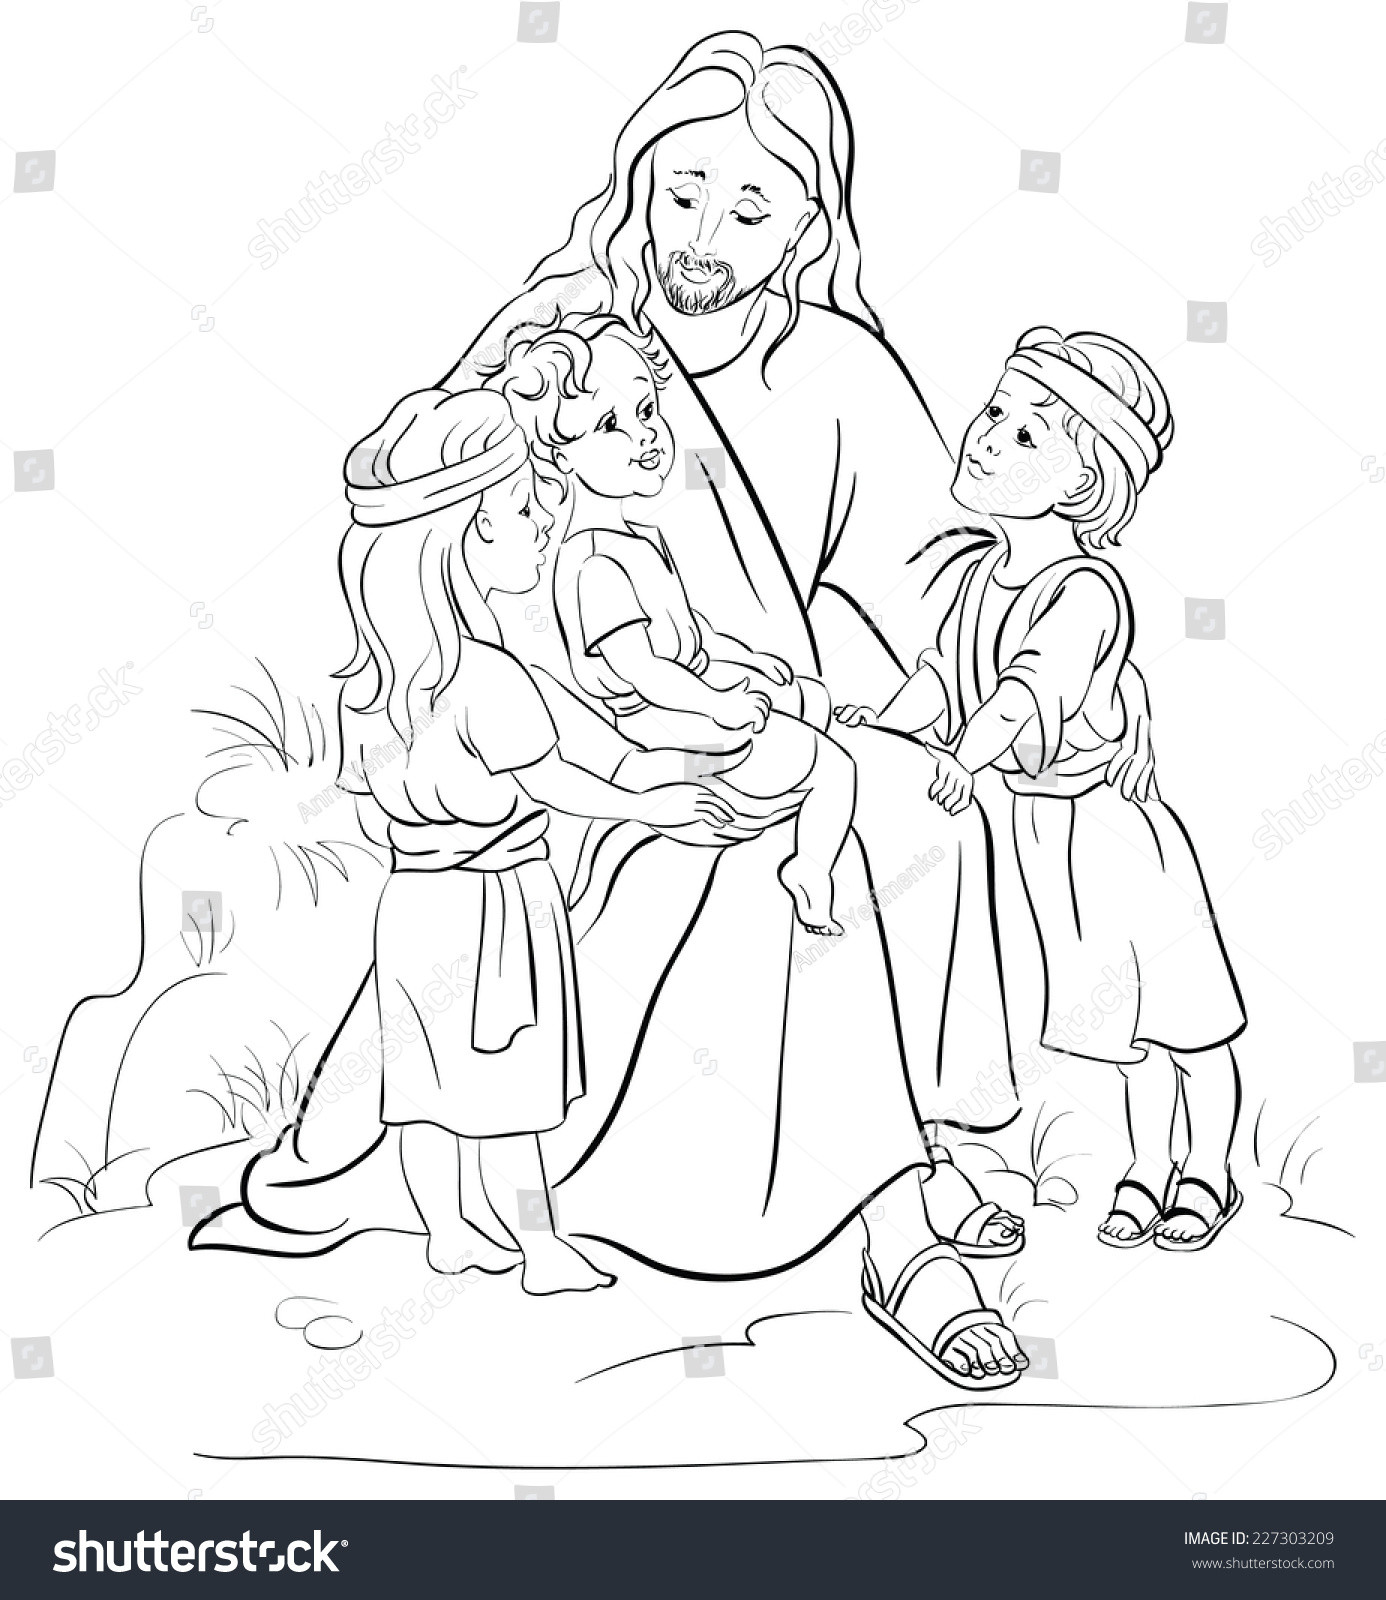 Jesus Children Coloring Page
 Jesus And Children Colouring Page Also Available Colored